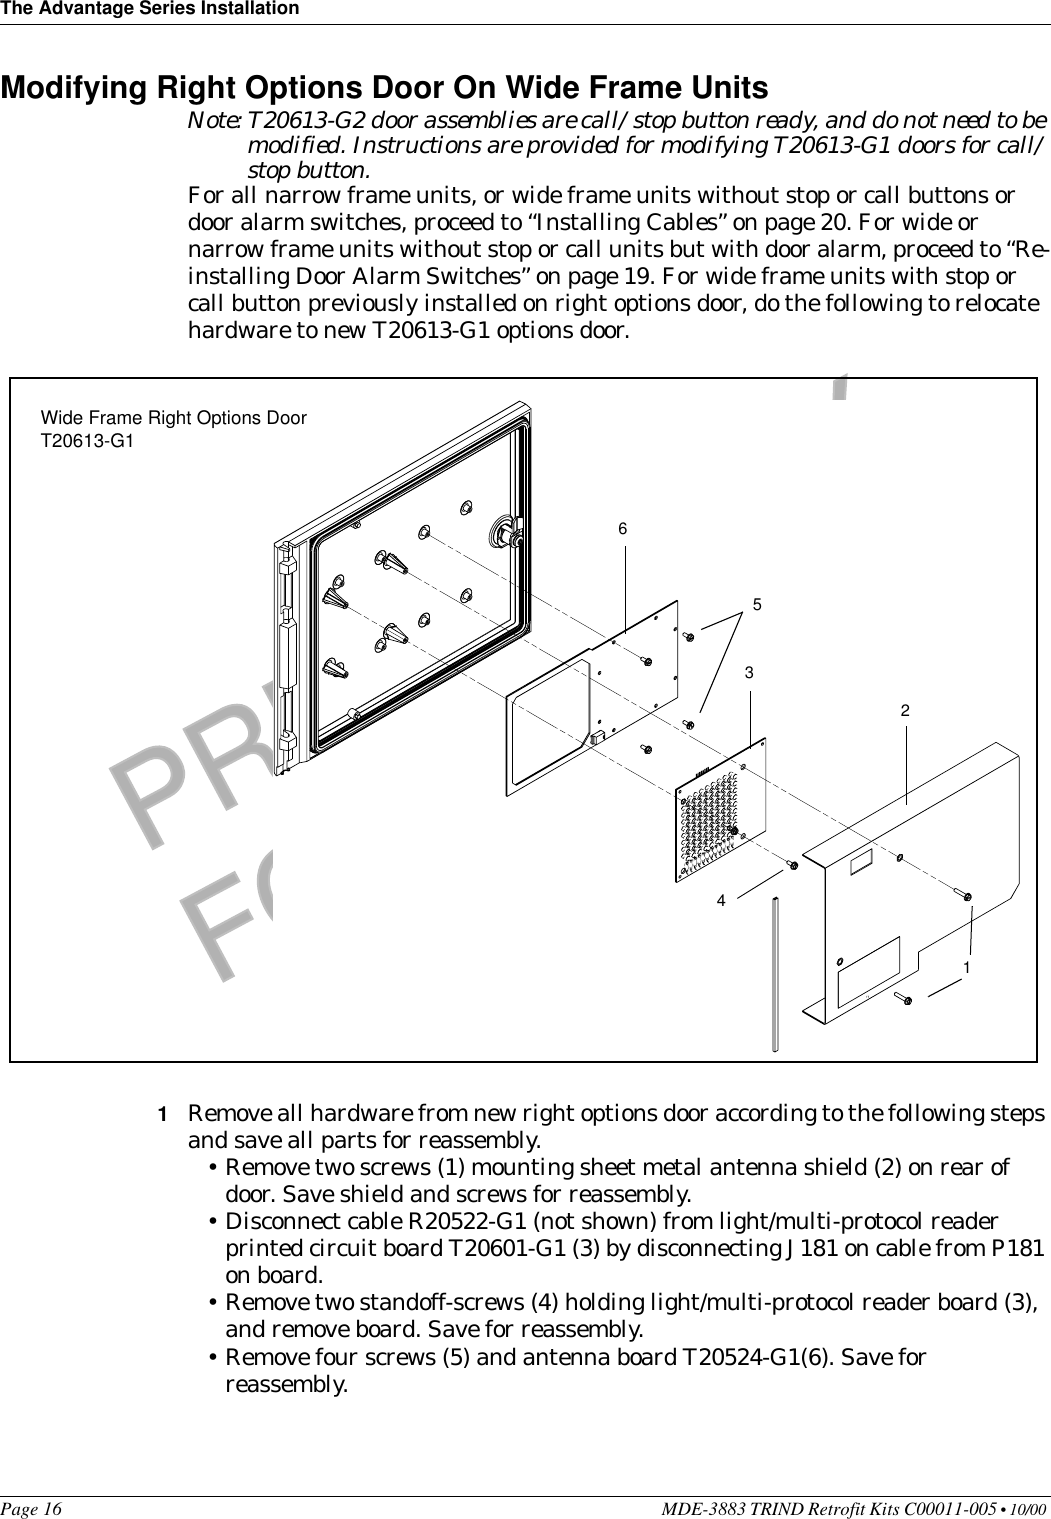 The Advantage Series InstallationPage 16 MDE-3883 TRIND Retrofit Kits C00011-005 • 10/00 PRELIMINARYFCC 11/30Modifying Right Options Door On Wide Frame UnitsNote: T20613-G2 door assemblies are call/stop button ready, and do not need to be modified. Instructions are provided for modifying T20613-G1 doors for call/stop button.For all narrow frame units, or wide frame units without stop or call buttons or door alarm switches, proceed to “Installing Cables” on page 20. For wide or narrow frame units without stop or call units but with door alarm, proceed to “Re-installing Door Alarm Switches” on page 19. For wide frame units with stop or call button previously installed on right options door, do the following to relocate hardware to new T20613-G1 options door.1Remove all hardware from new right options door according to the following steps and save all parts for reassembly.•Remove two screws (1) mounting sheet metal antenna shield (2) on rear of door. Save shield and screws for reassembly.•Disconnect cable R20522-G1 (not shown) from light/multi-protocol reader printed circuit board T20601-G1 (3) by disconnecting J181 on cable from P181 on board.•Remove two standoff-screws (4) holding light/multi-protocol reader board (3), and remove board. Save for reassembly.•Remove four screws (5) and antenna board T20524-G1(6). Save for reassembly.123456Wide Frame Right Options Door T20613-G1